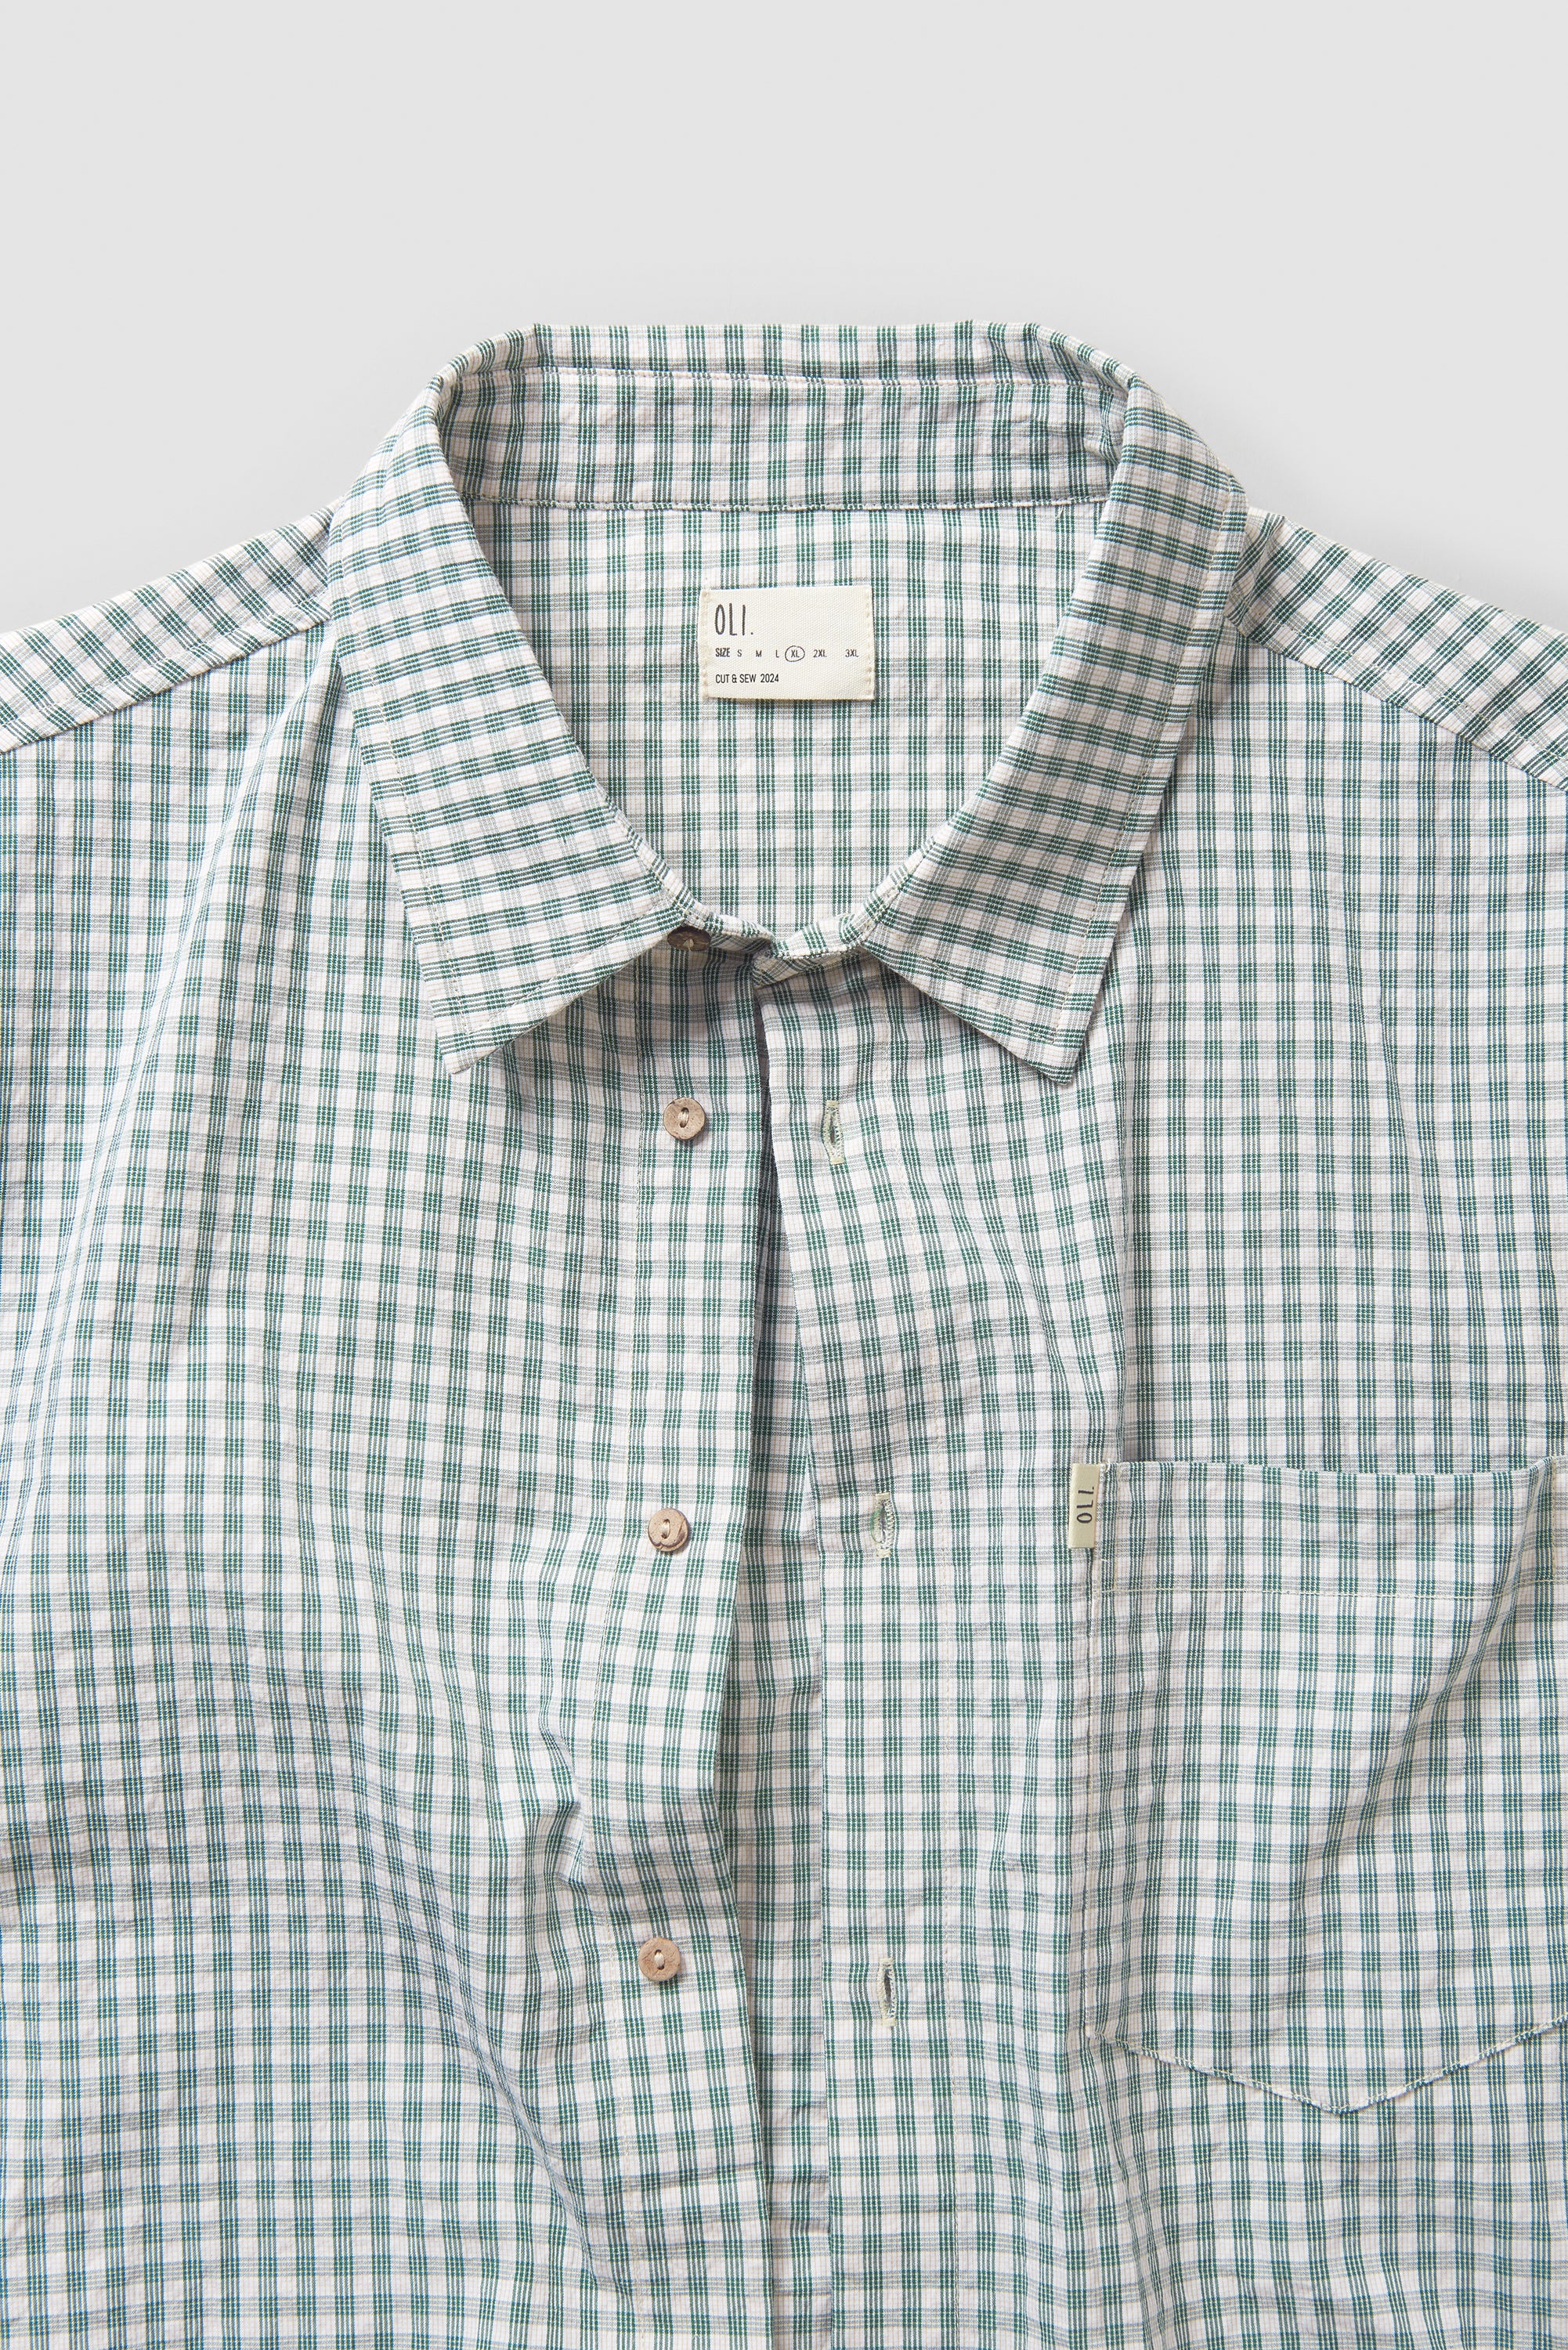 Grid Button Up - Green